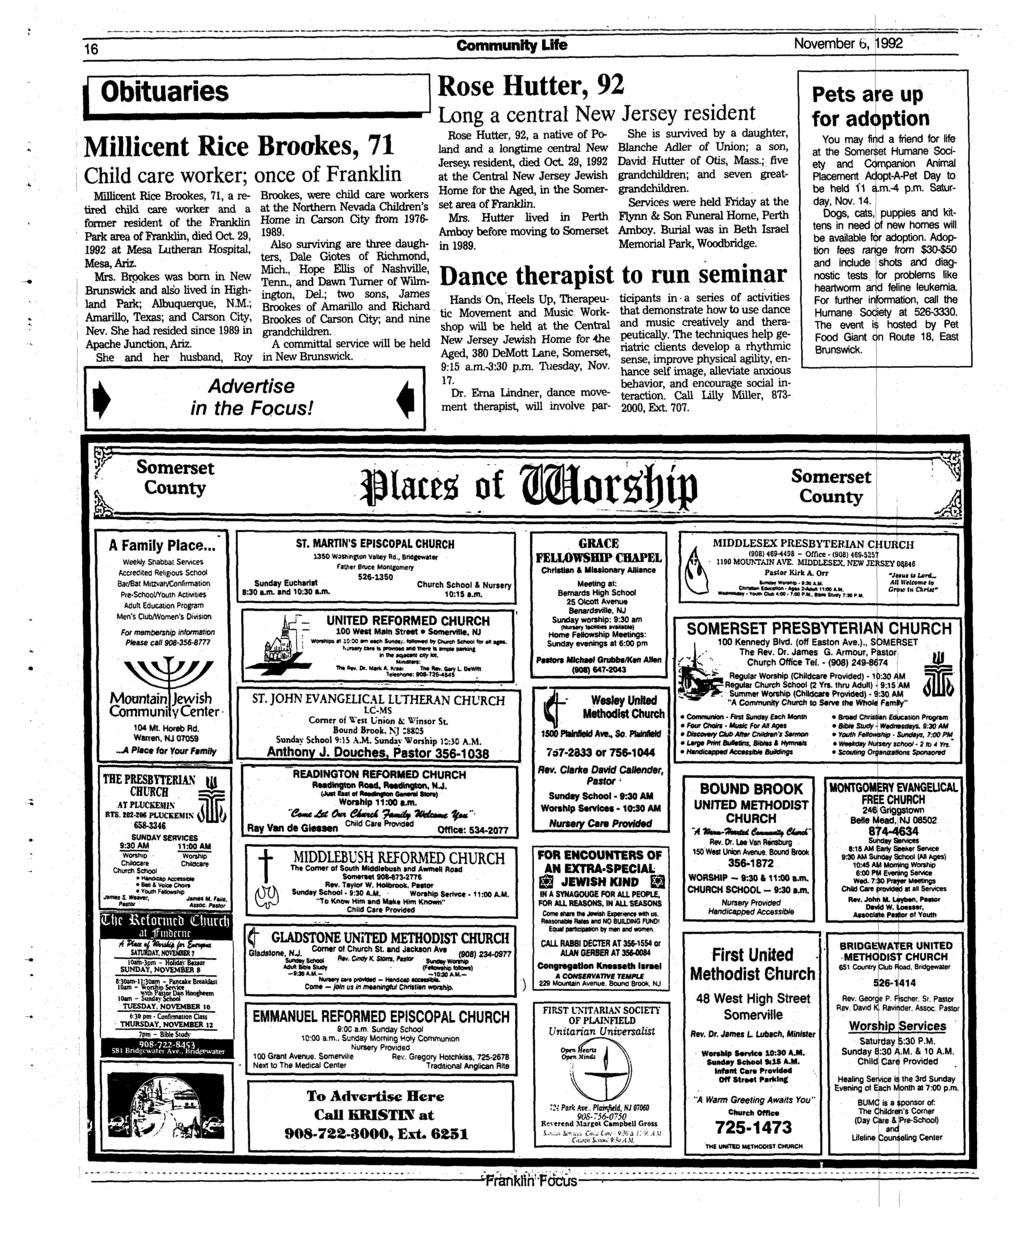 16 Community Life November 6, 1992 Obituaries Millicent Rice Brookes, 71 Child care worker; once of Franklin Millicent Rice Brookes, 71, a retired child care worker and a former resident of the